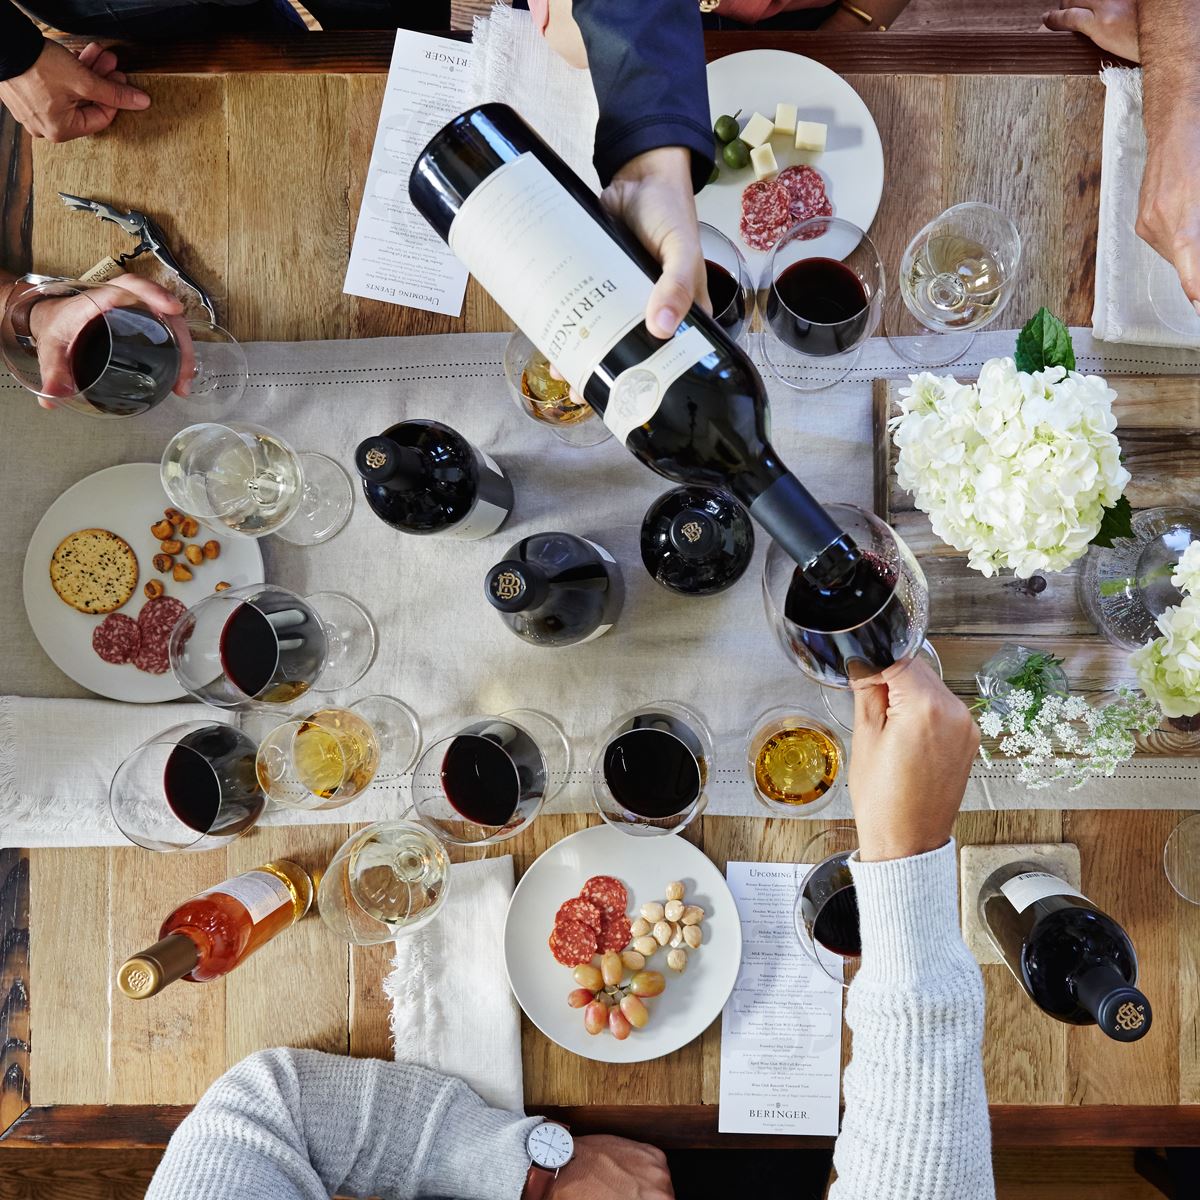 Plan it with your friends and a bottle of Beringer wine